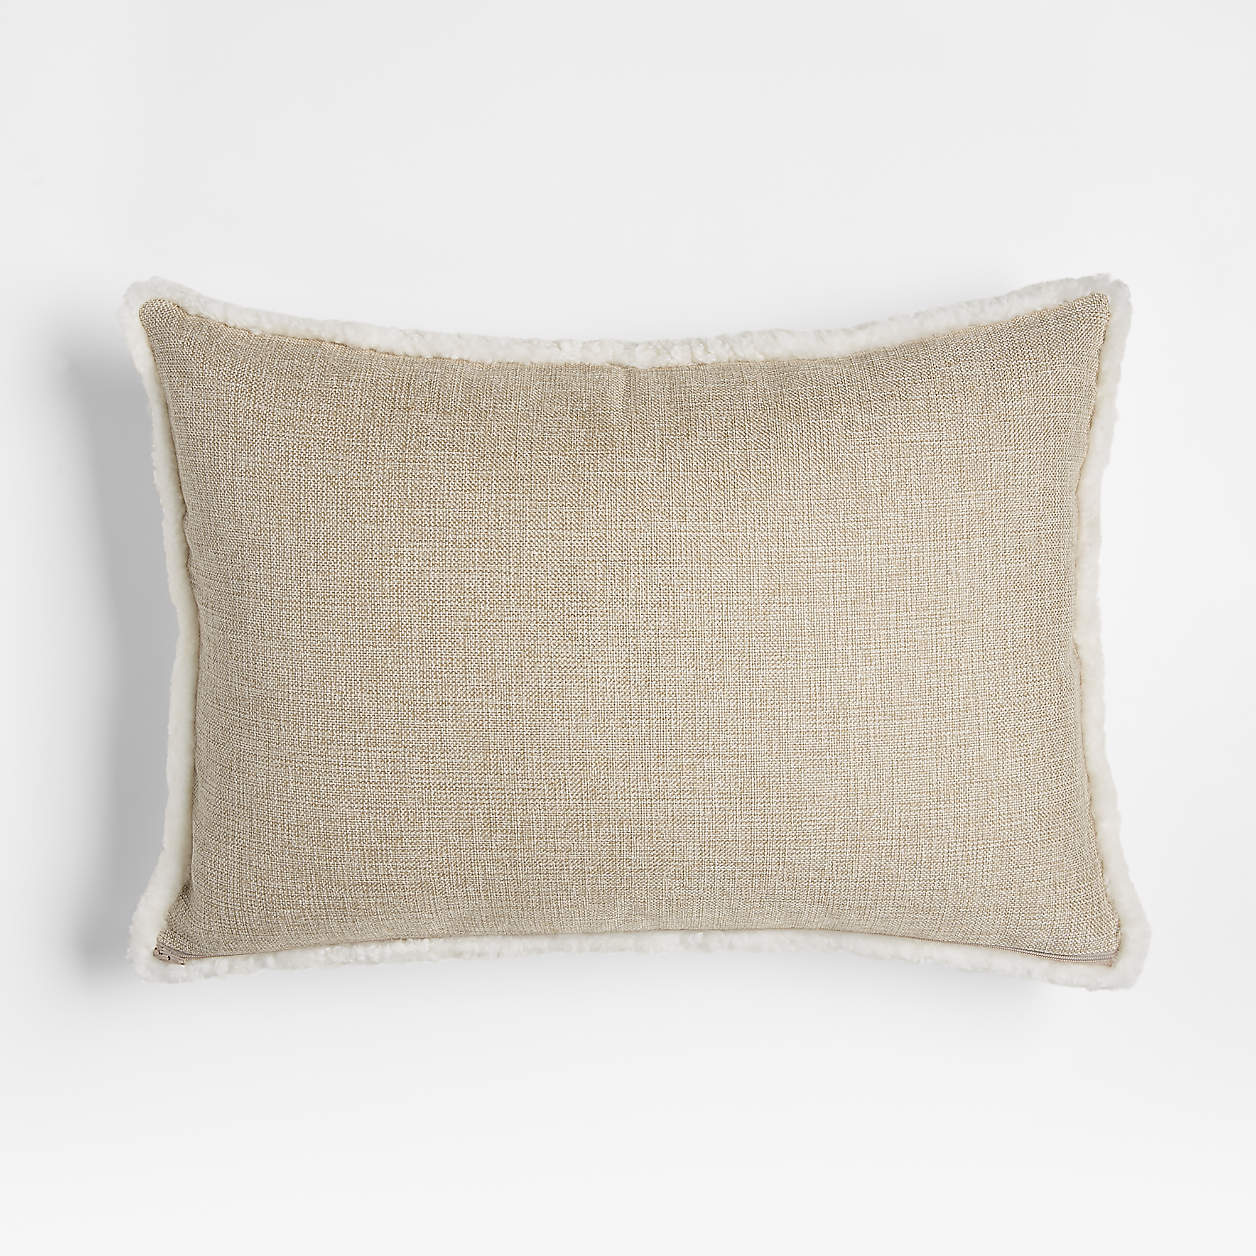 Malmo Shearling 22"x15" Ivory Throw Pillow Cover